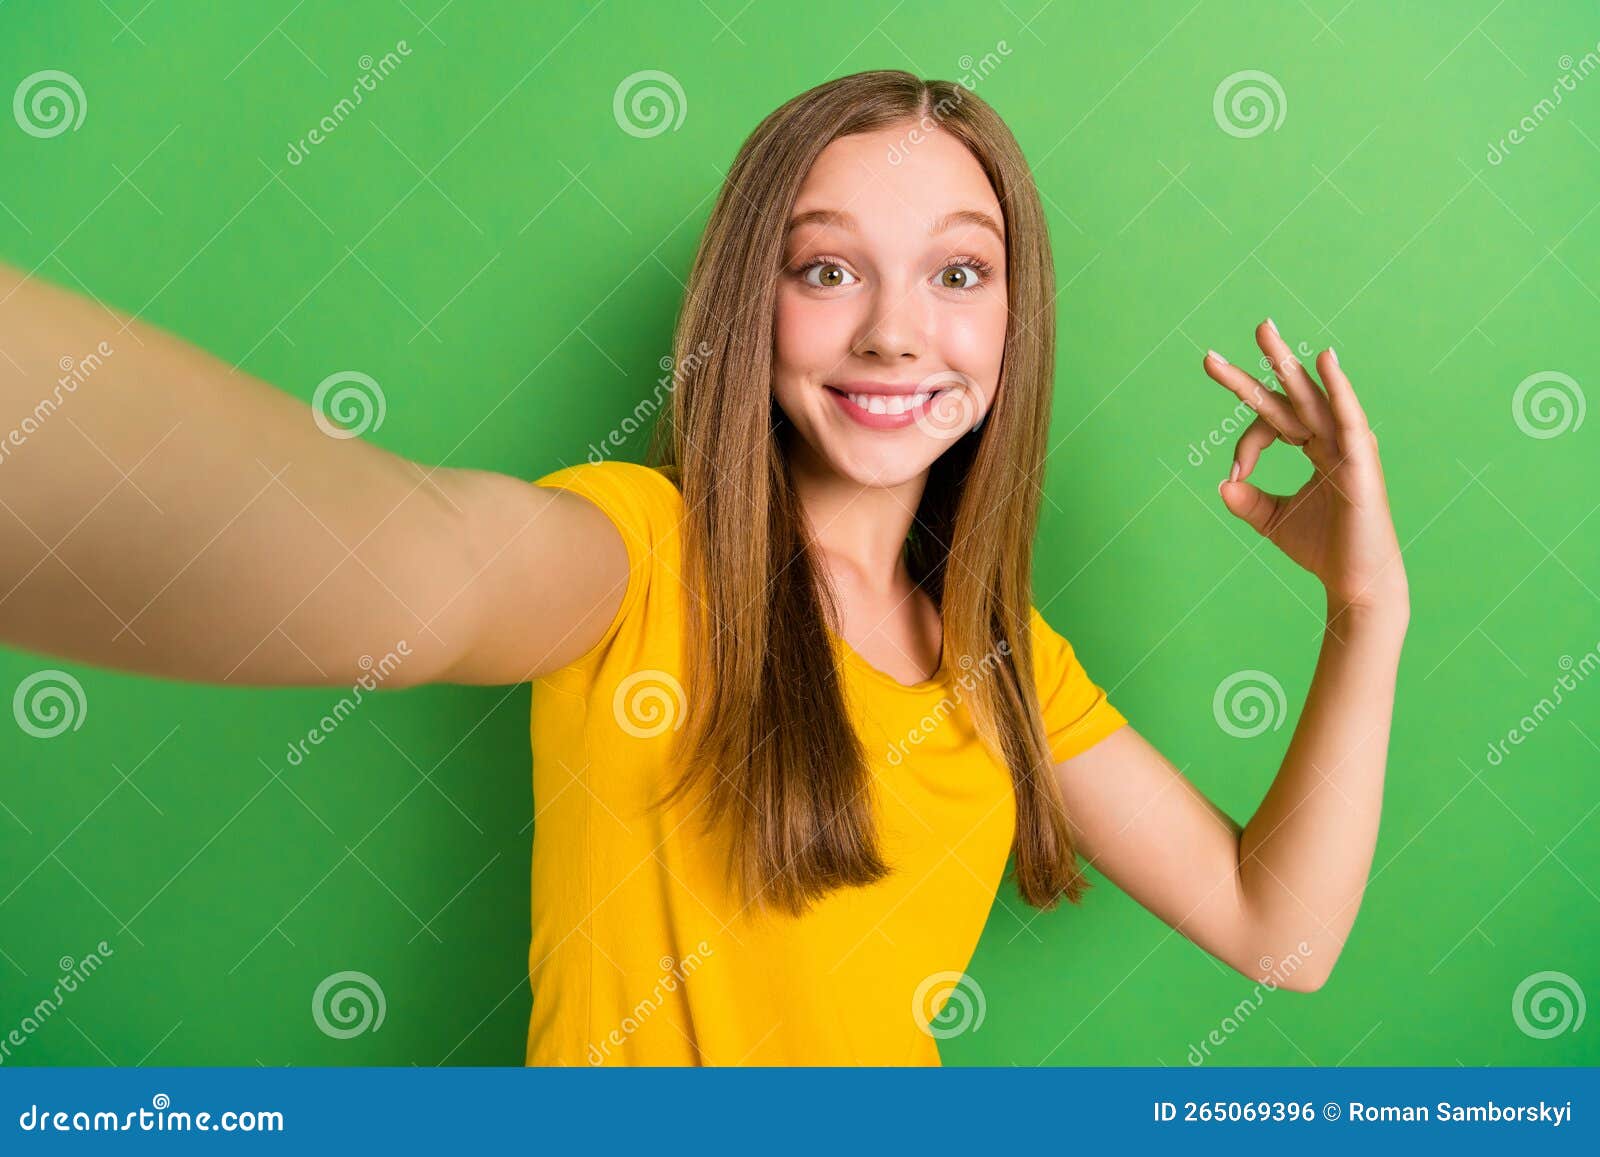 Selfie Closeup Photo Of Smiling Cute Teenager Showing Okey Sign Recommendation New Youtube